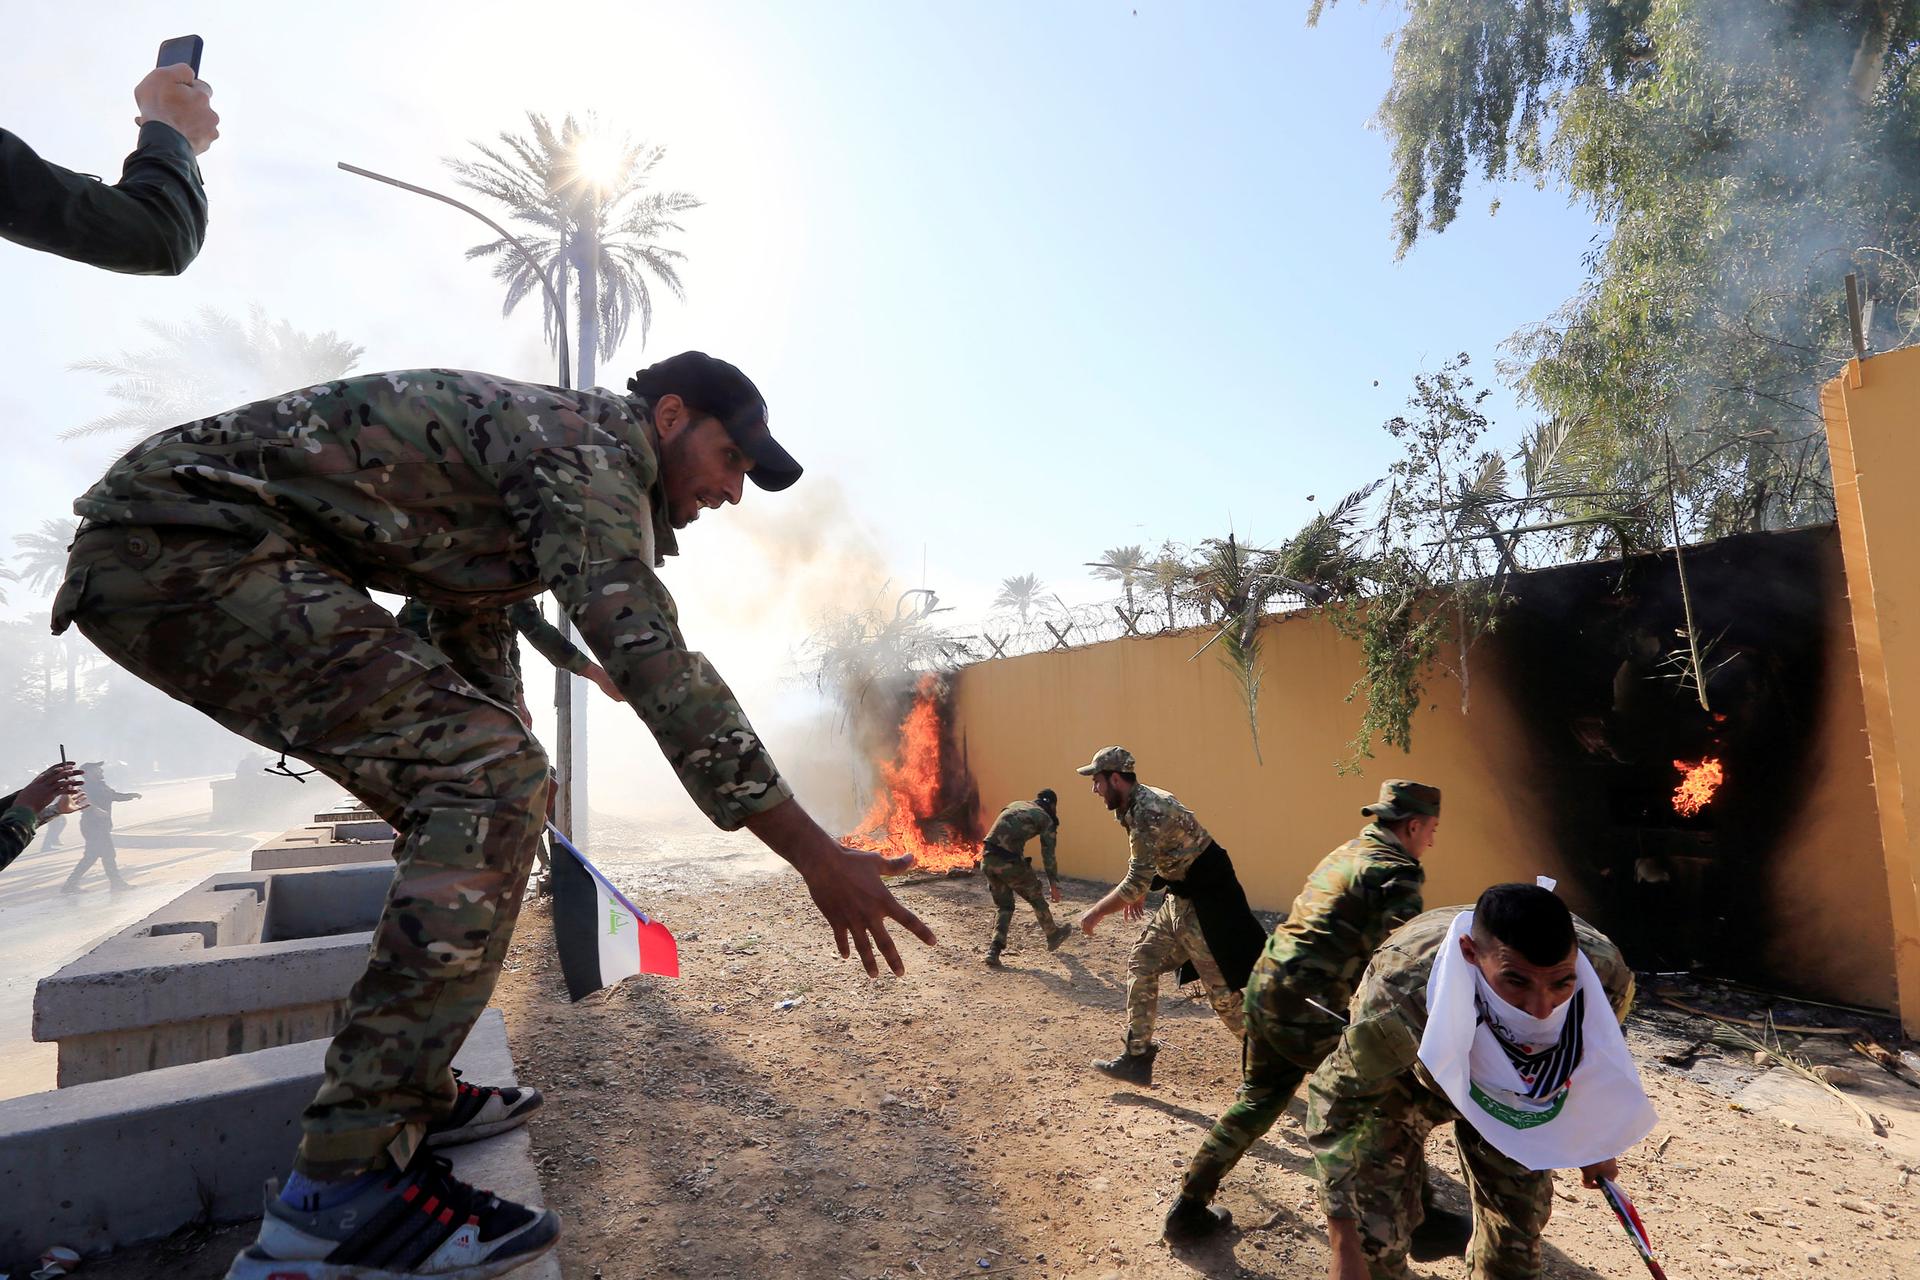 Several men are shown wearing military fatigues outside of a khaki-colored wall that has been set on fire.